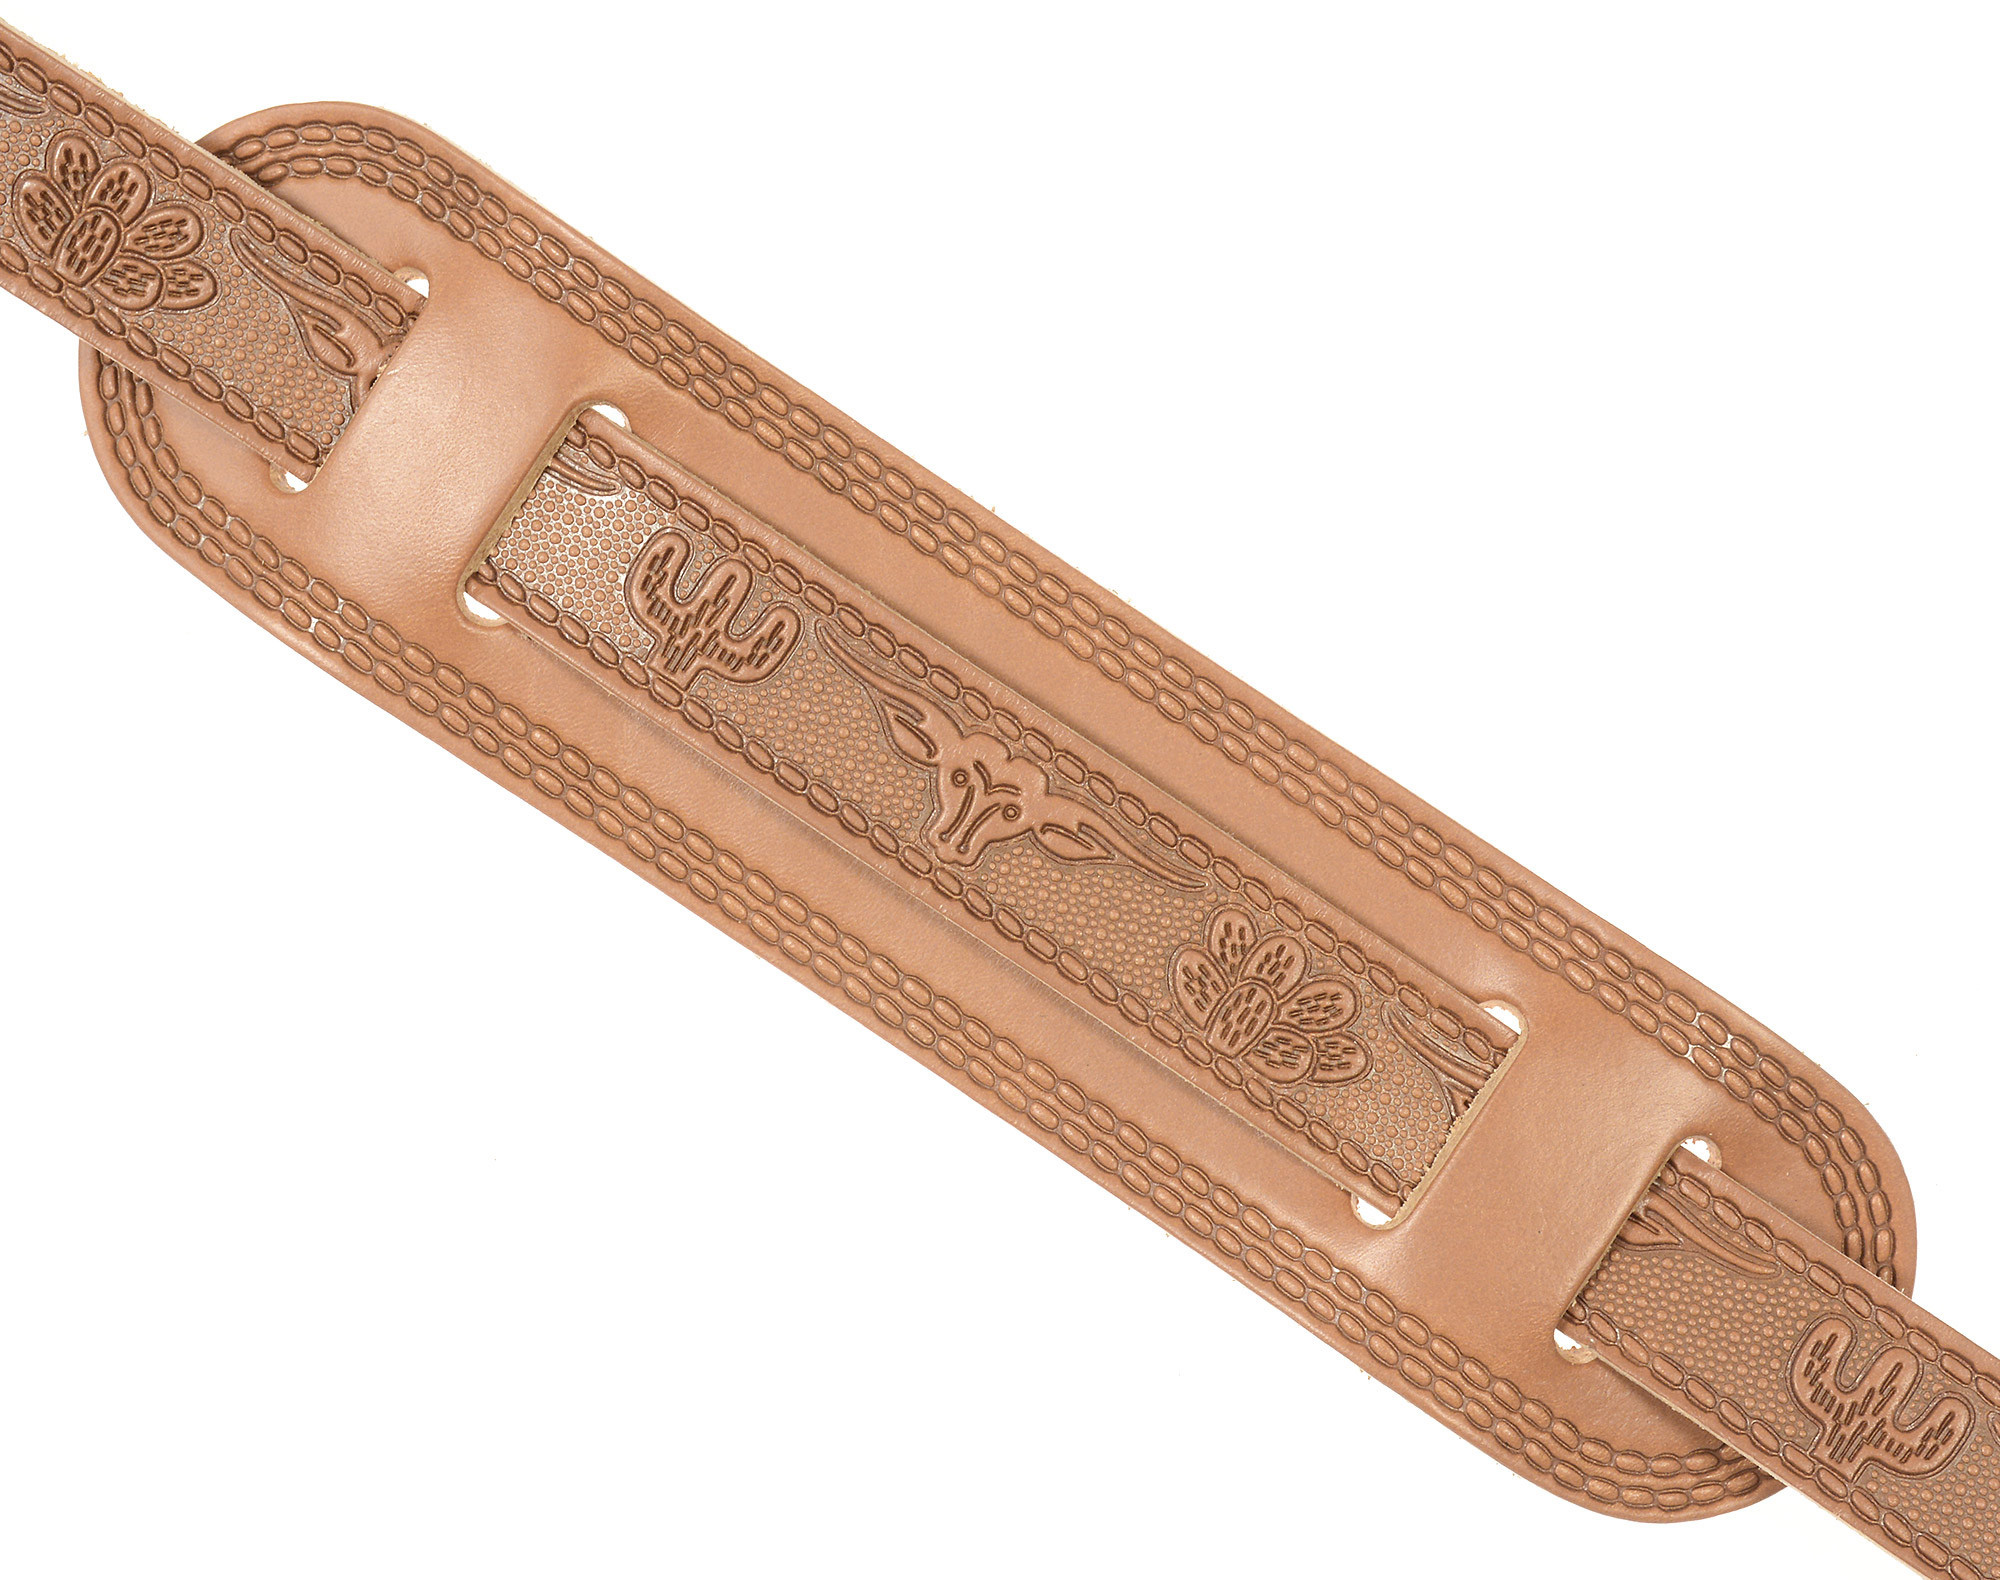 Gretsch Vintage Tooled Leather Guitar Strap Russet Cuir - Sangle Courroie - Variation 1